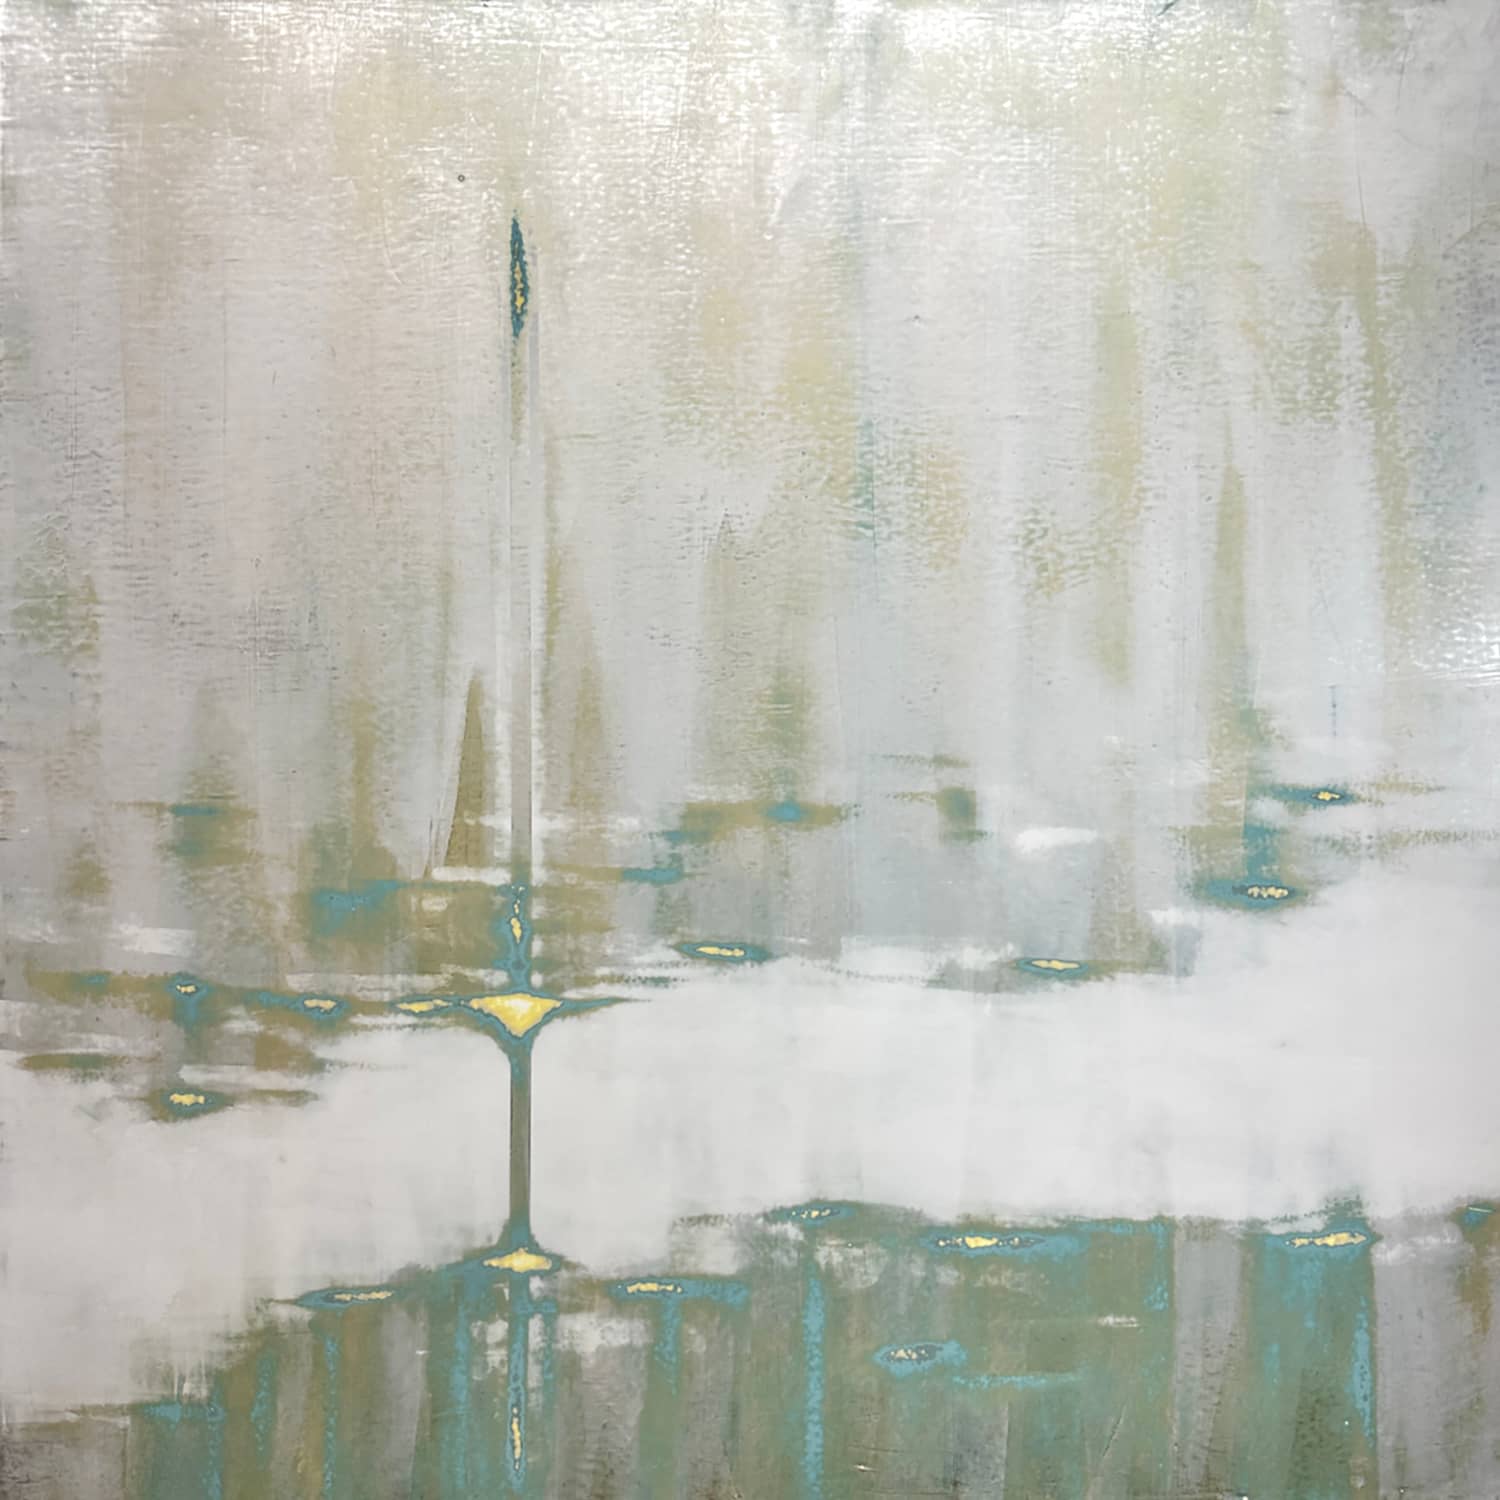 Somewhere Silver II_Audra Weaser_Acrylic, Plaster Paint, Metallic pigments on Canvas_48 X 48